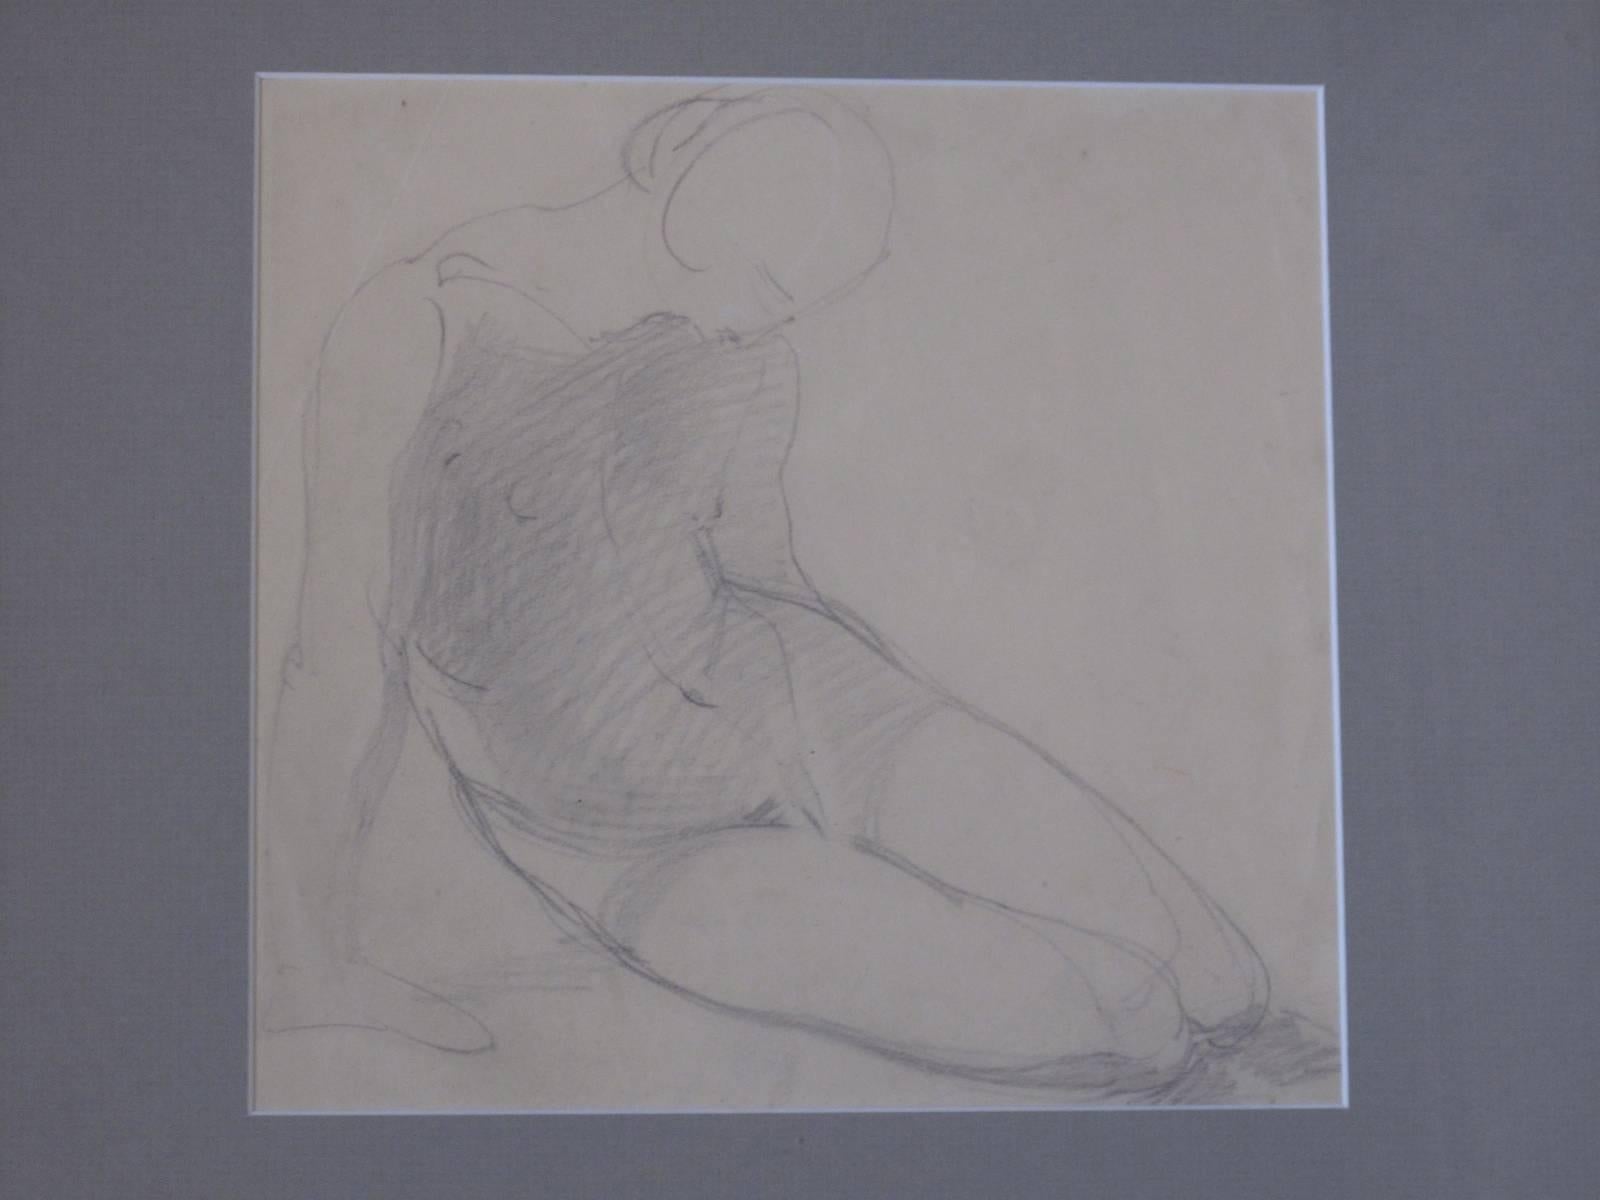 Pencil on paper. Seated figure drawing. Unsigned. From the estate of a collector and interior designer in Washington, DC.